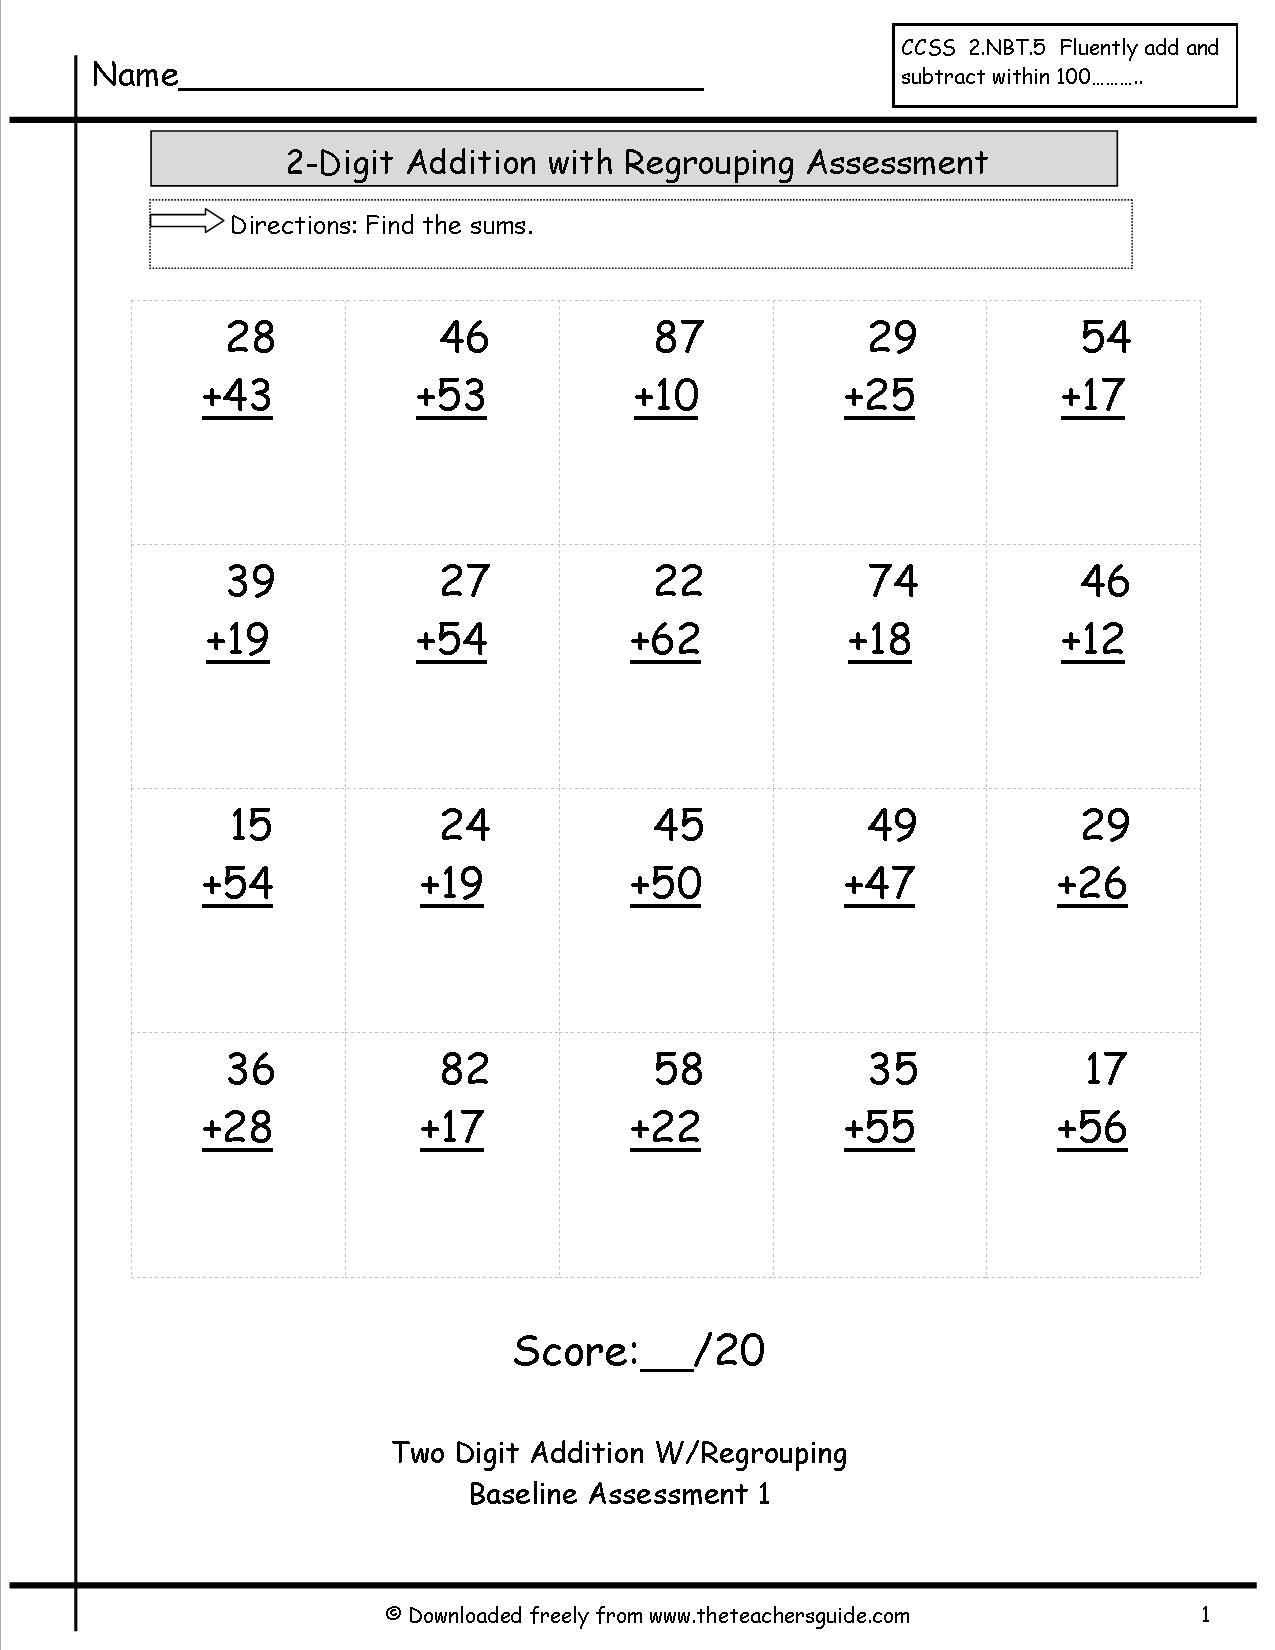 11 Best Images Of 4 Digit Subtraction With Regrouping Worksheet Addition With Regrouping Boxes